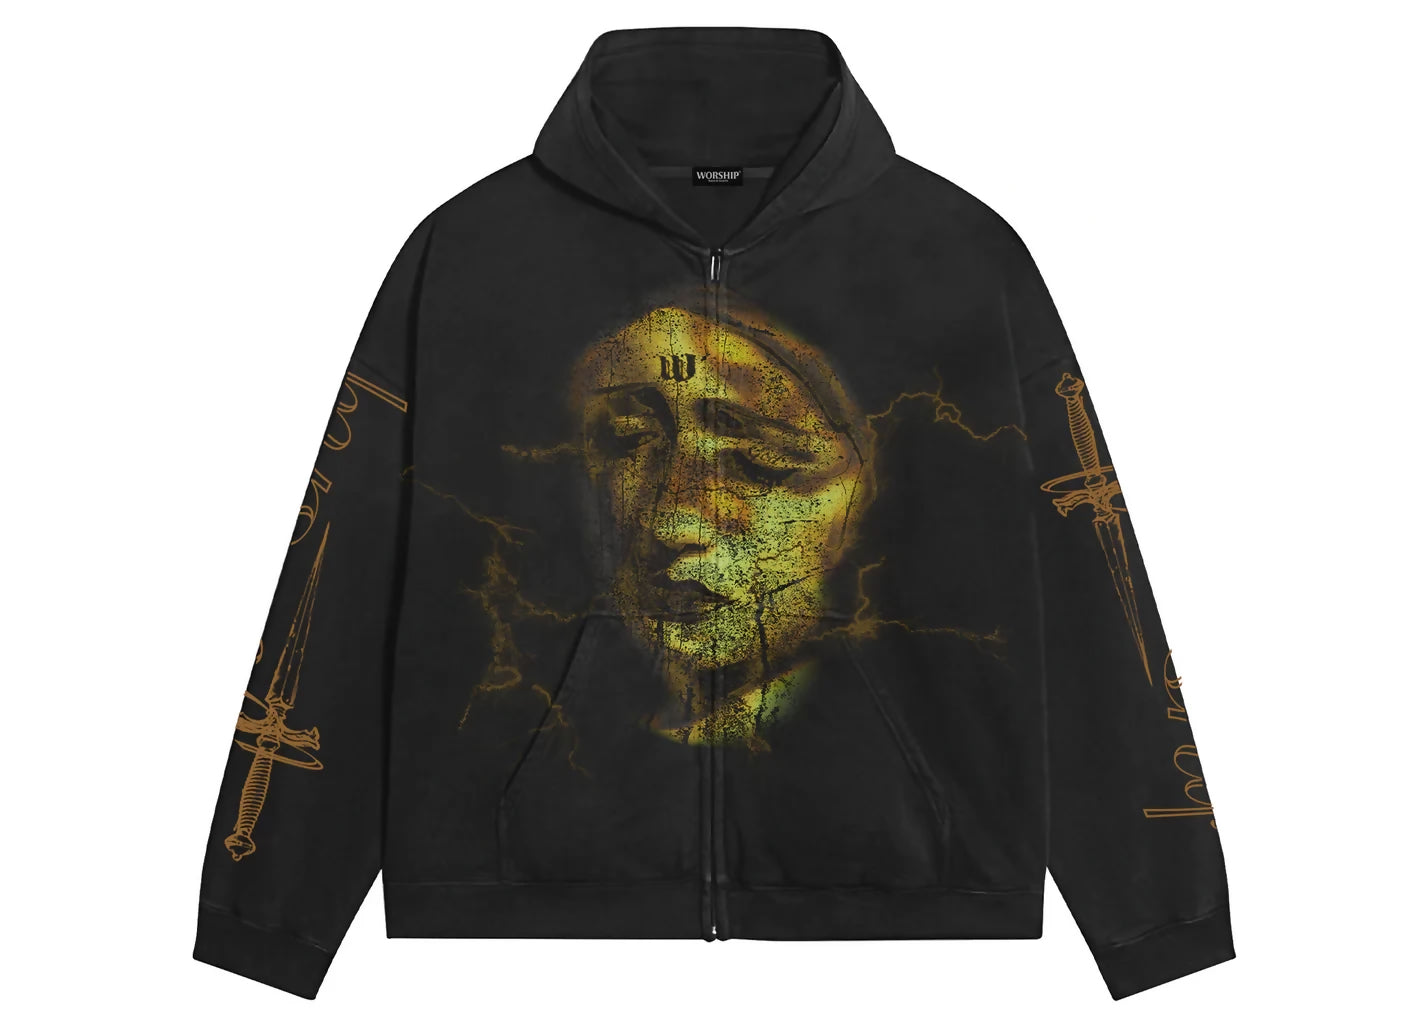 Mother Mary Hoodie